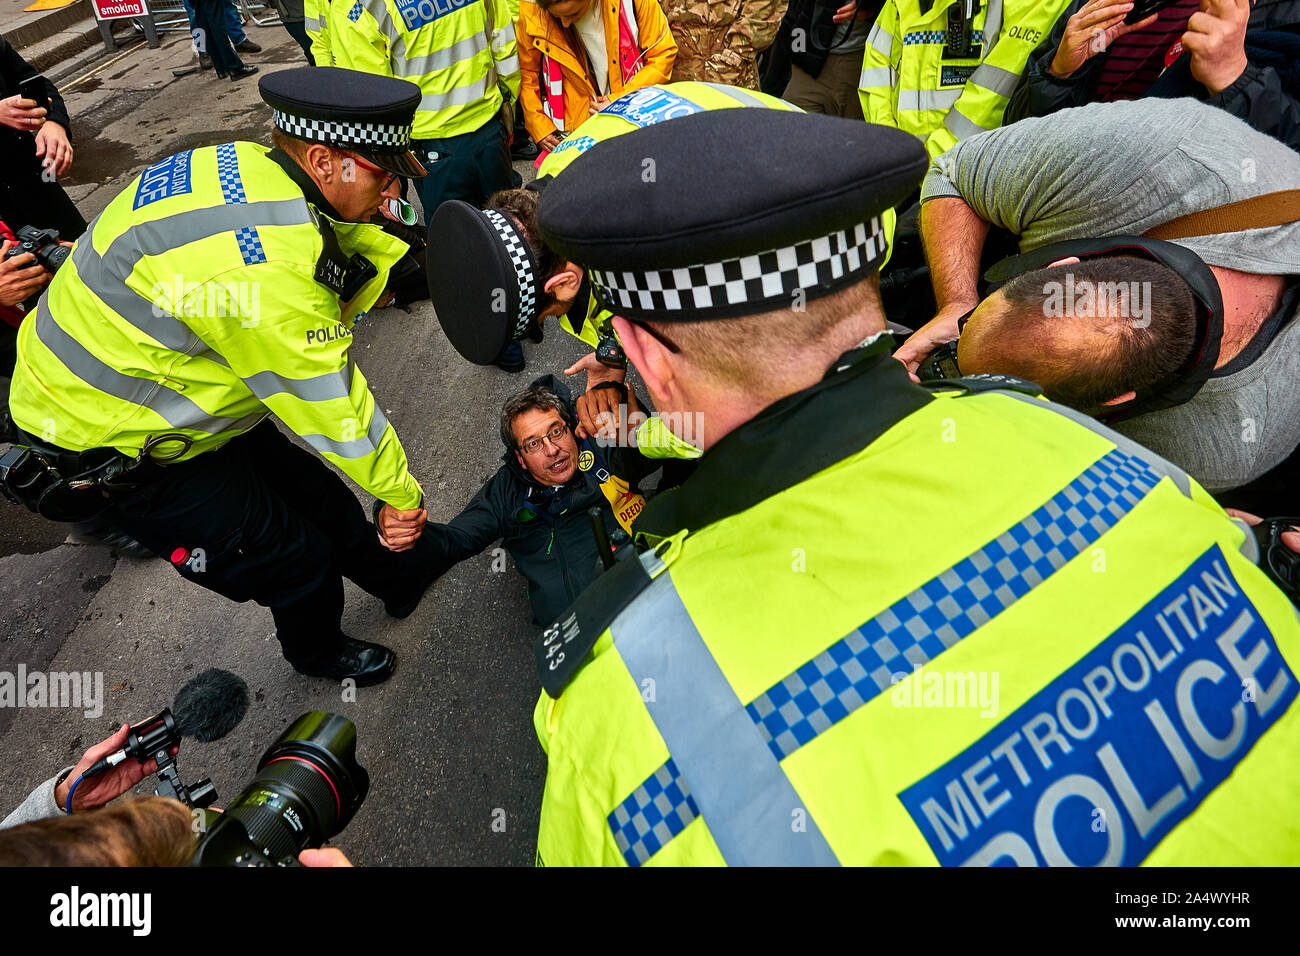 London, U.K. - Oct 16, 2019: Environmental campaigner George Monbiot in the middle of a media and police scrum prior to getting arrested in Trafalgar Square. Stock Photo